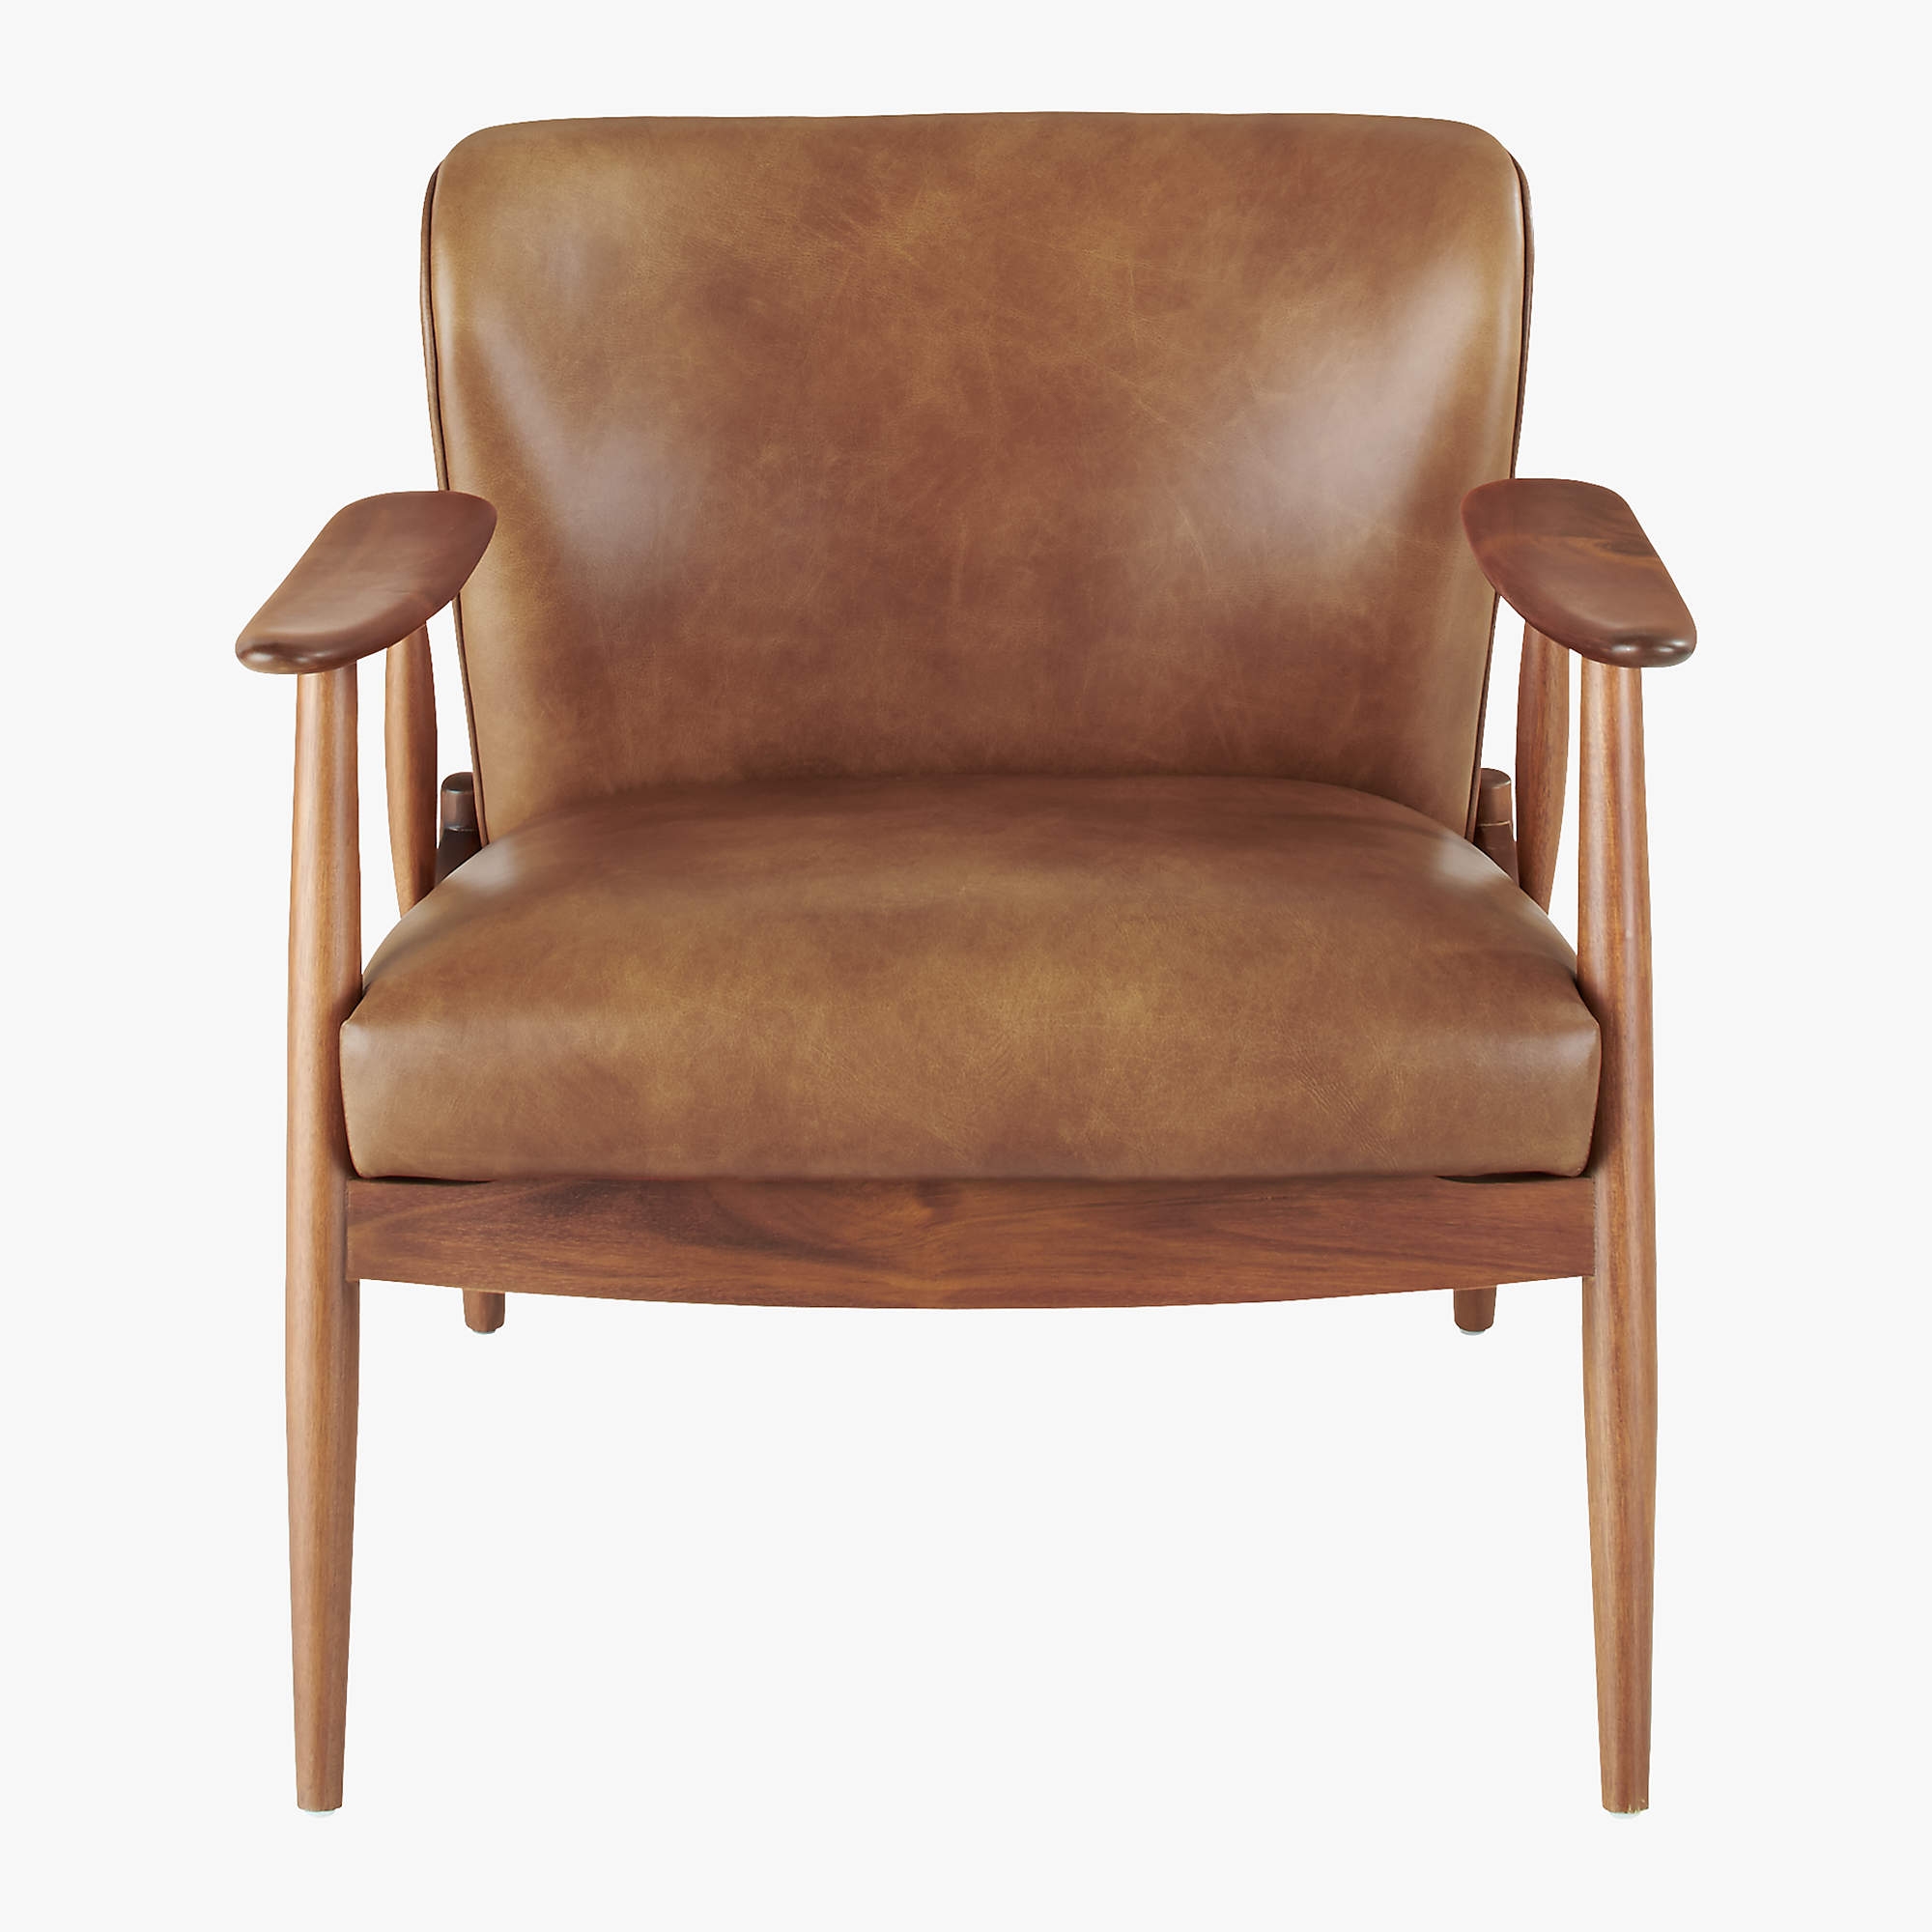 Troubadour Saddle Leather Wood Frame Chair, Kasen Brown RESTOCK Late June 2022 - Image 0